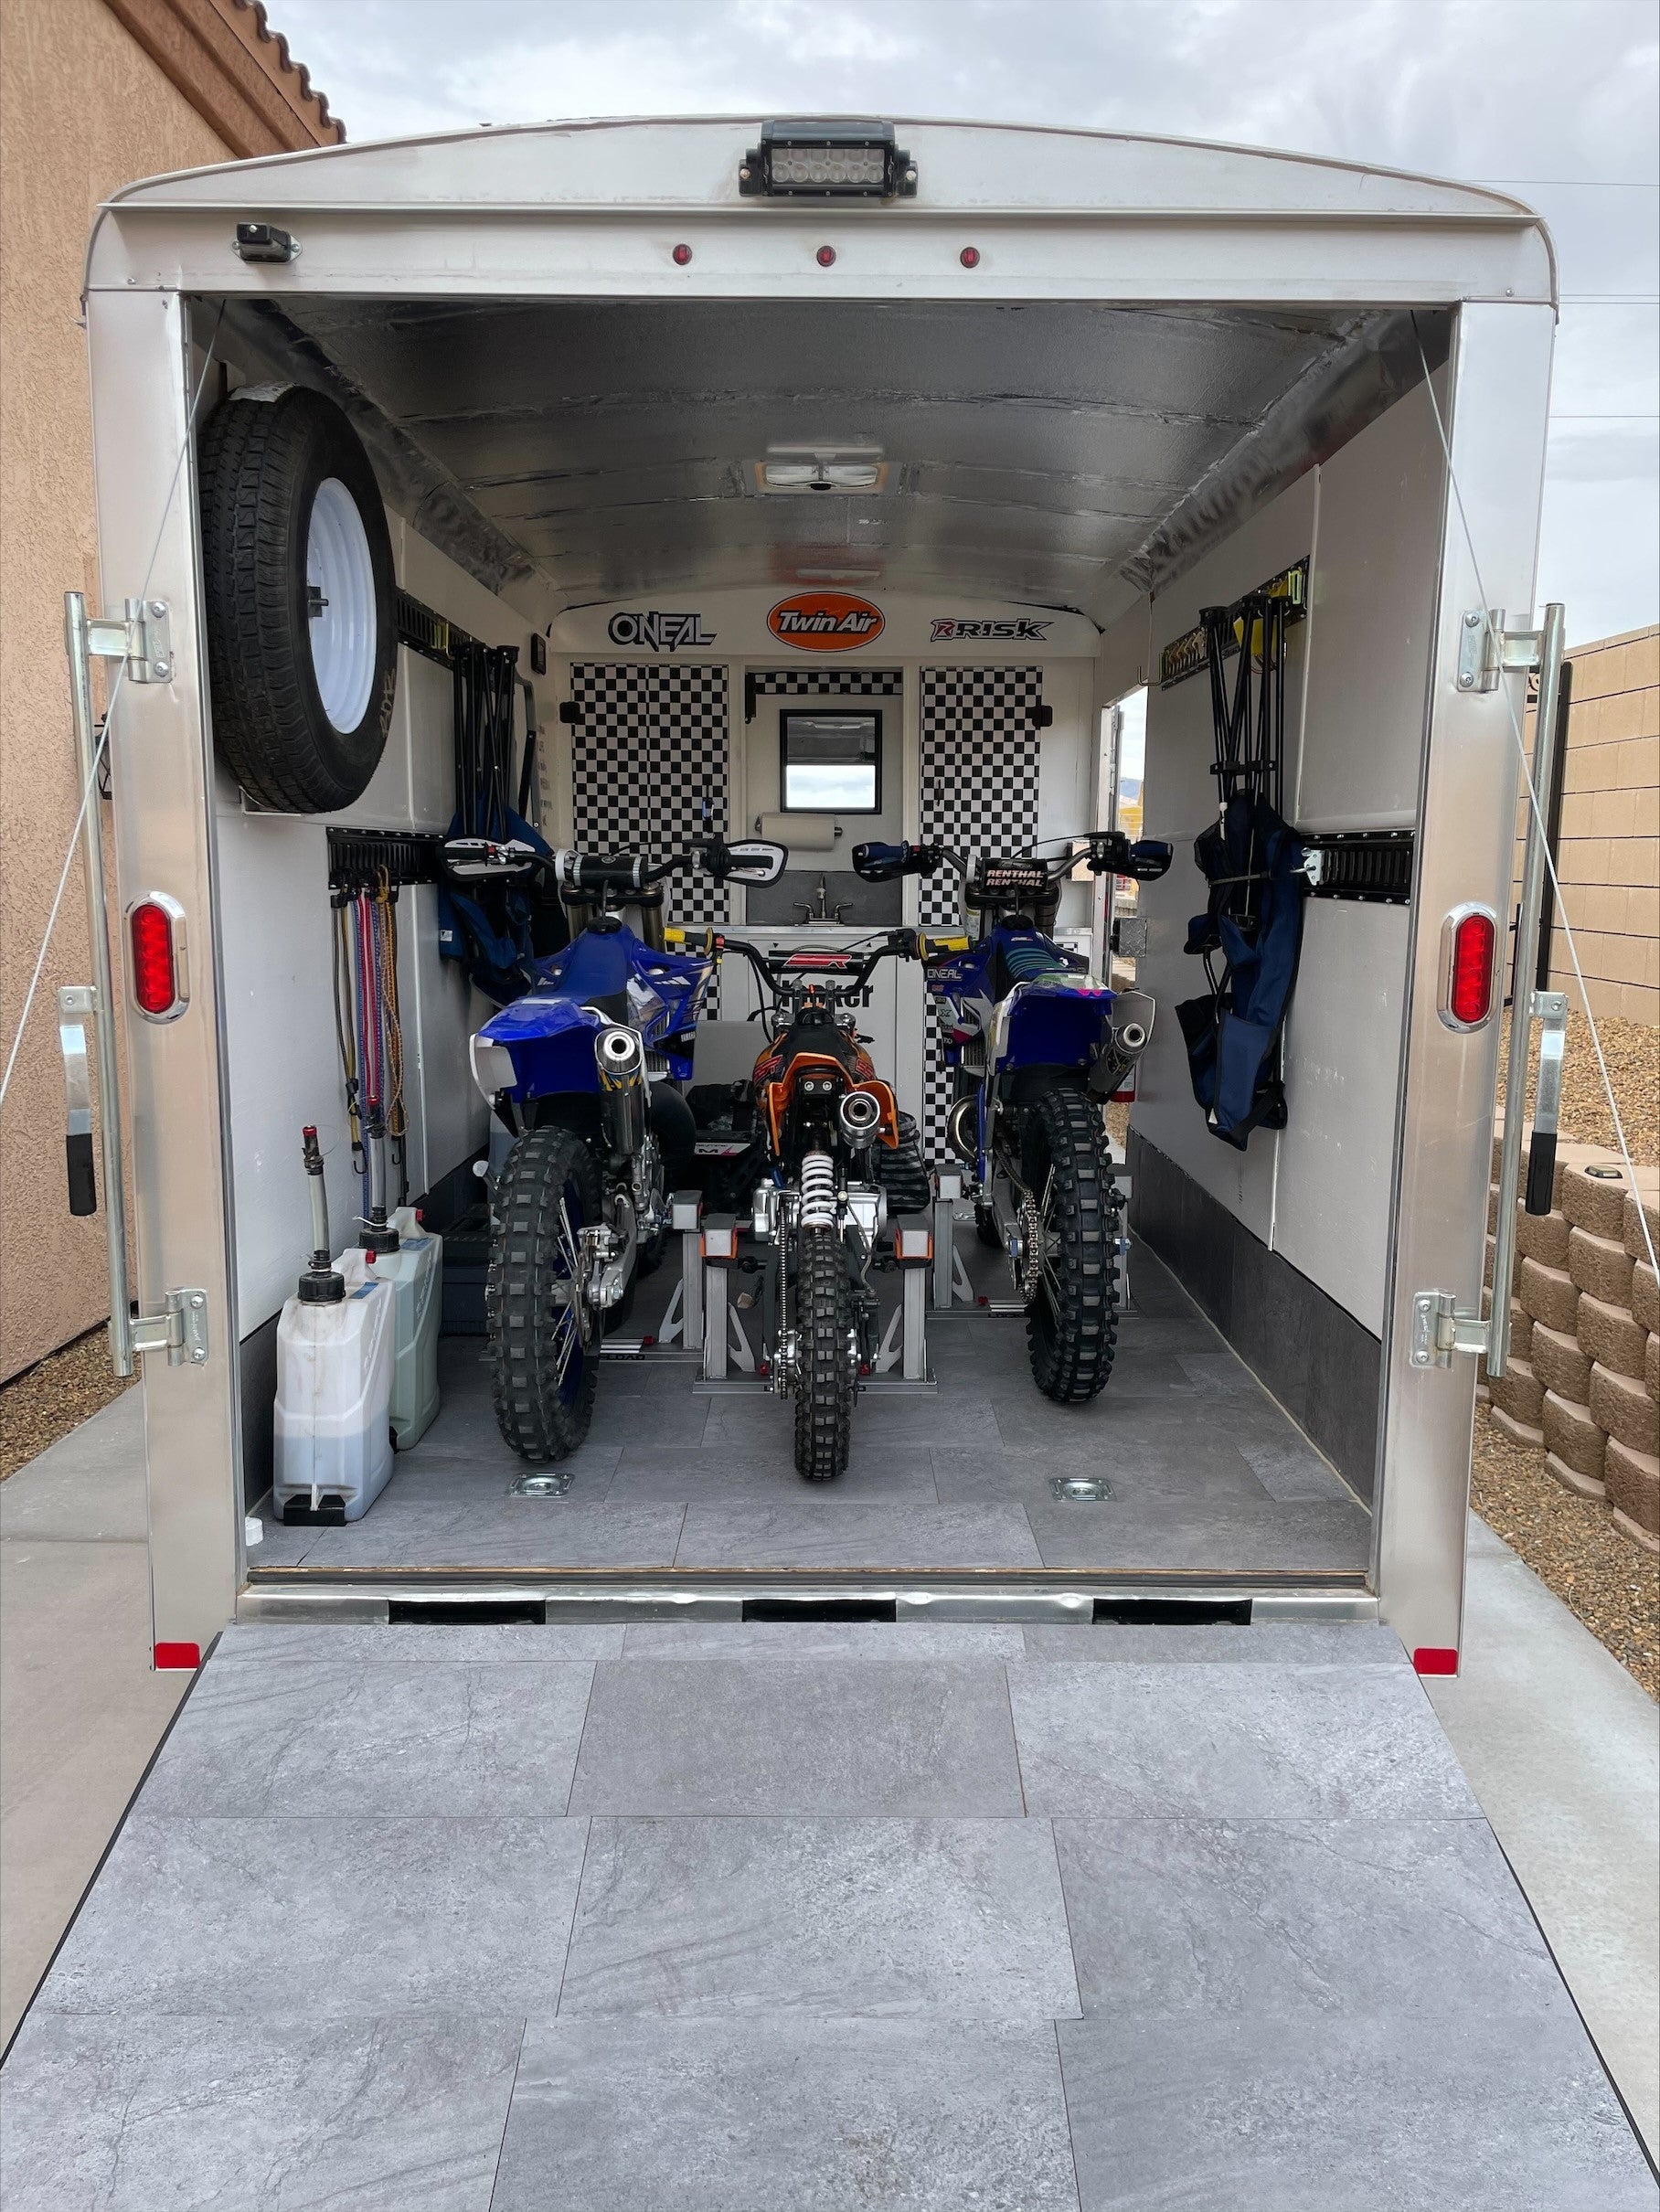 How To Secure a Dirt Bike in a Trailer Without Straps